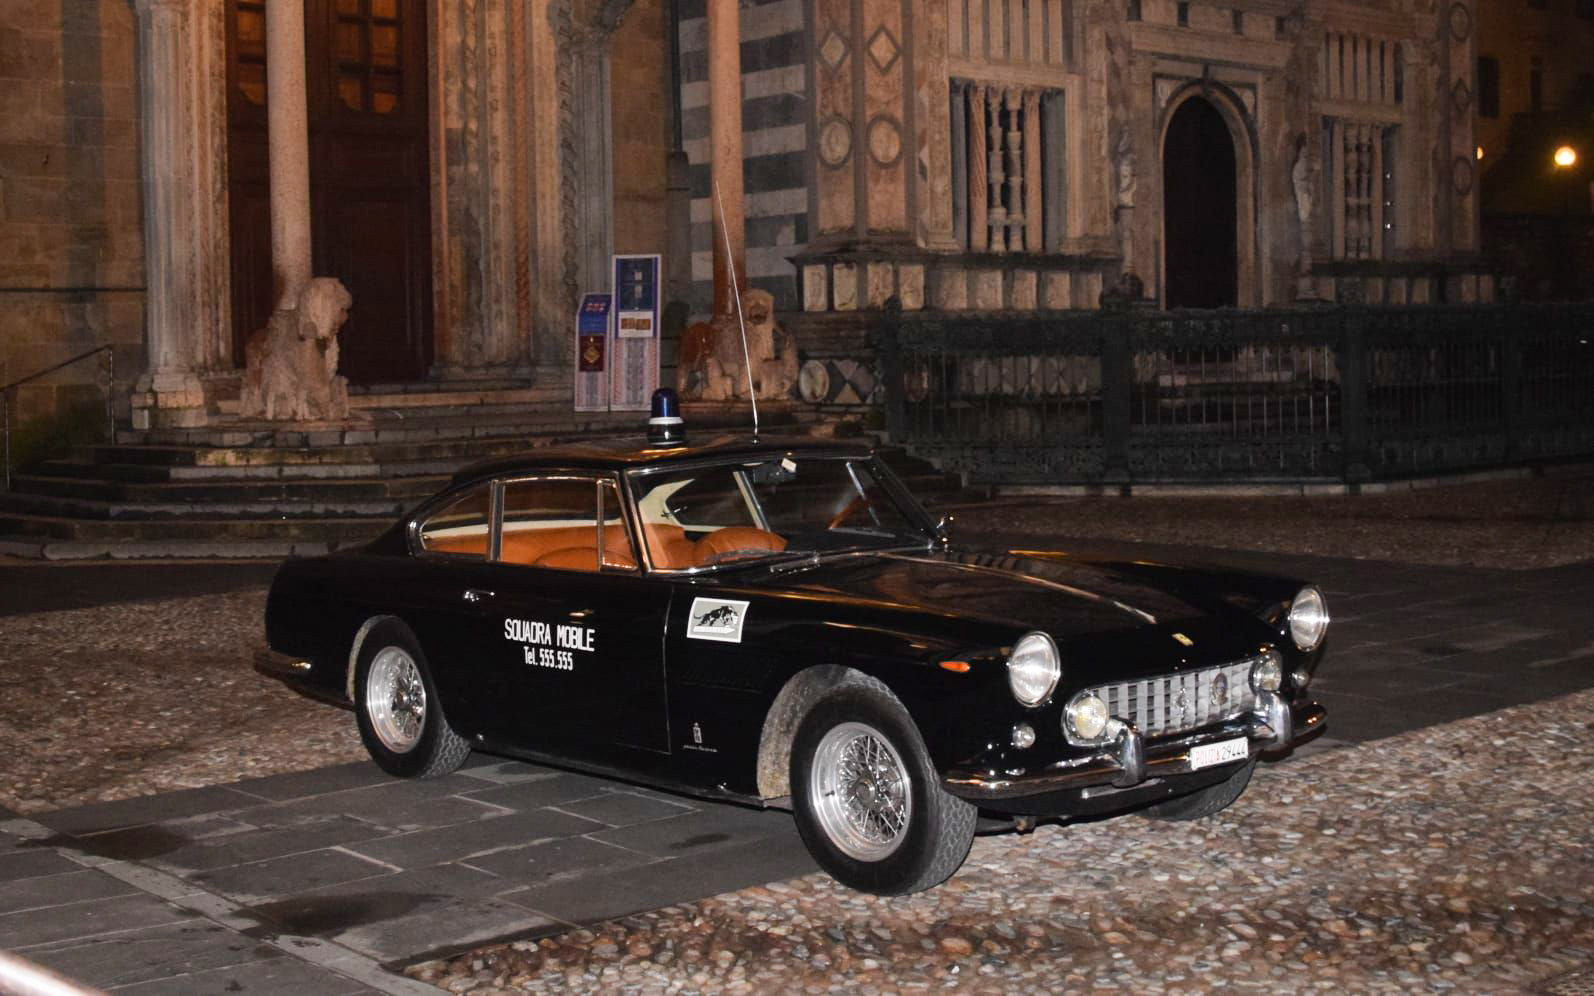 The first and greatest Ferrari police car of all was this 250 GTE